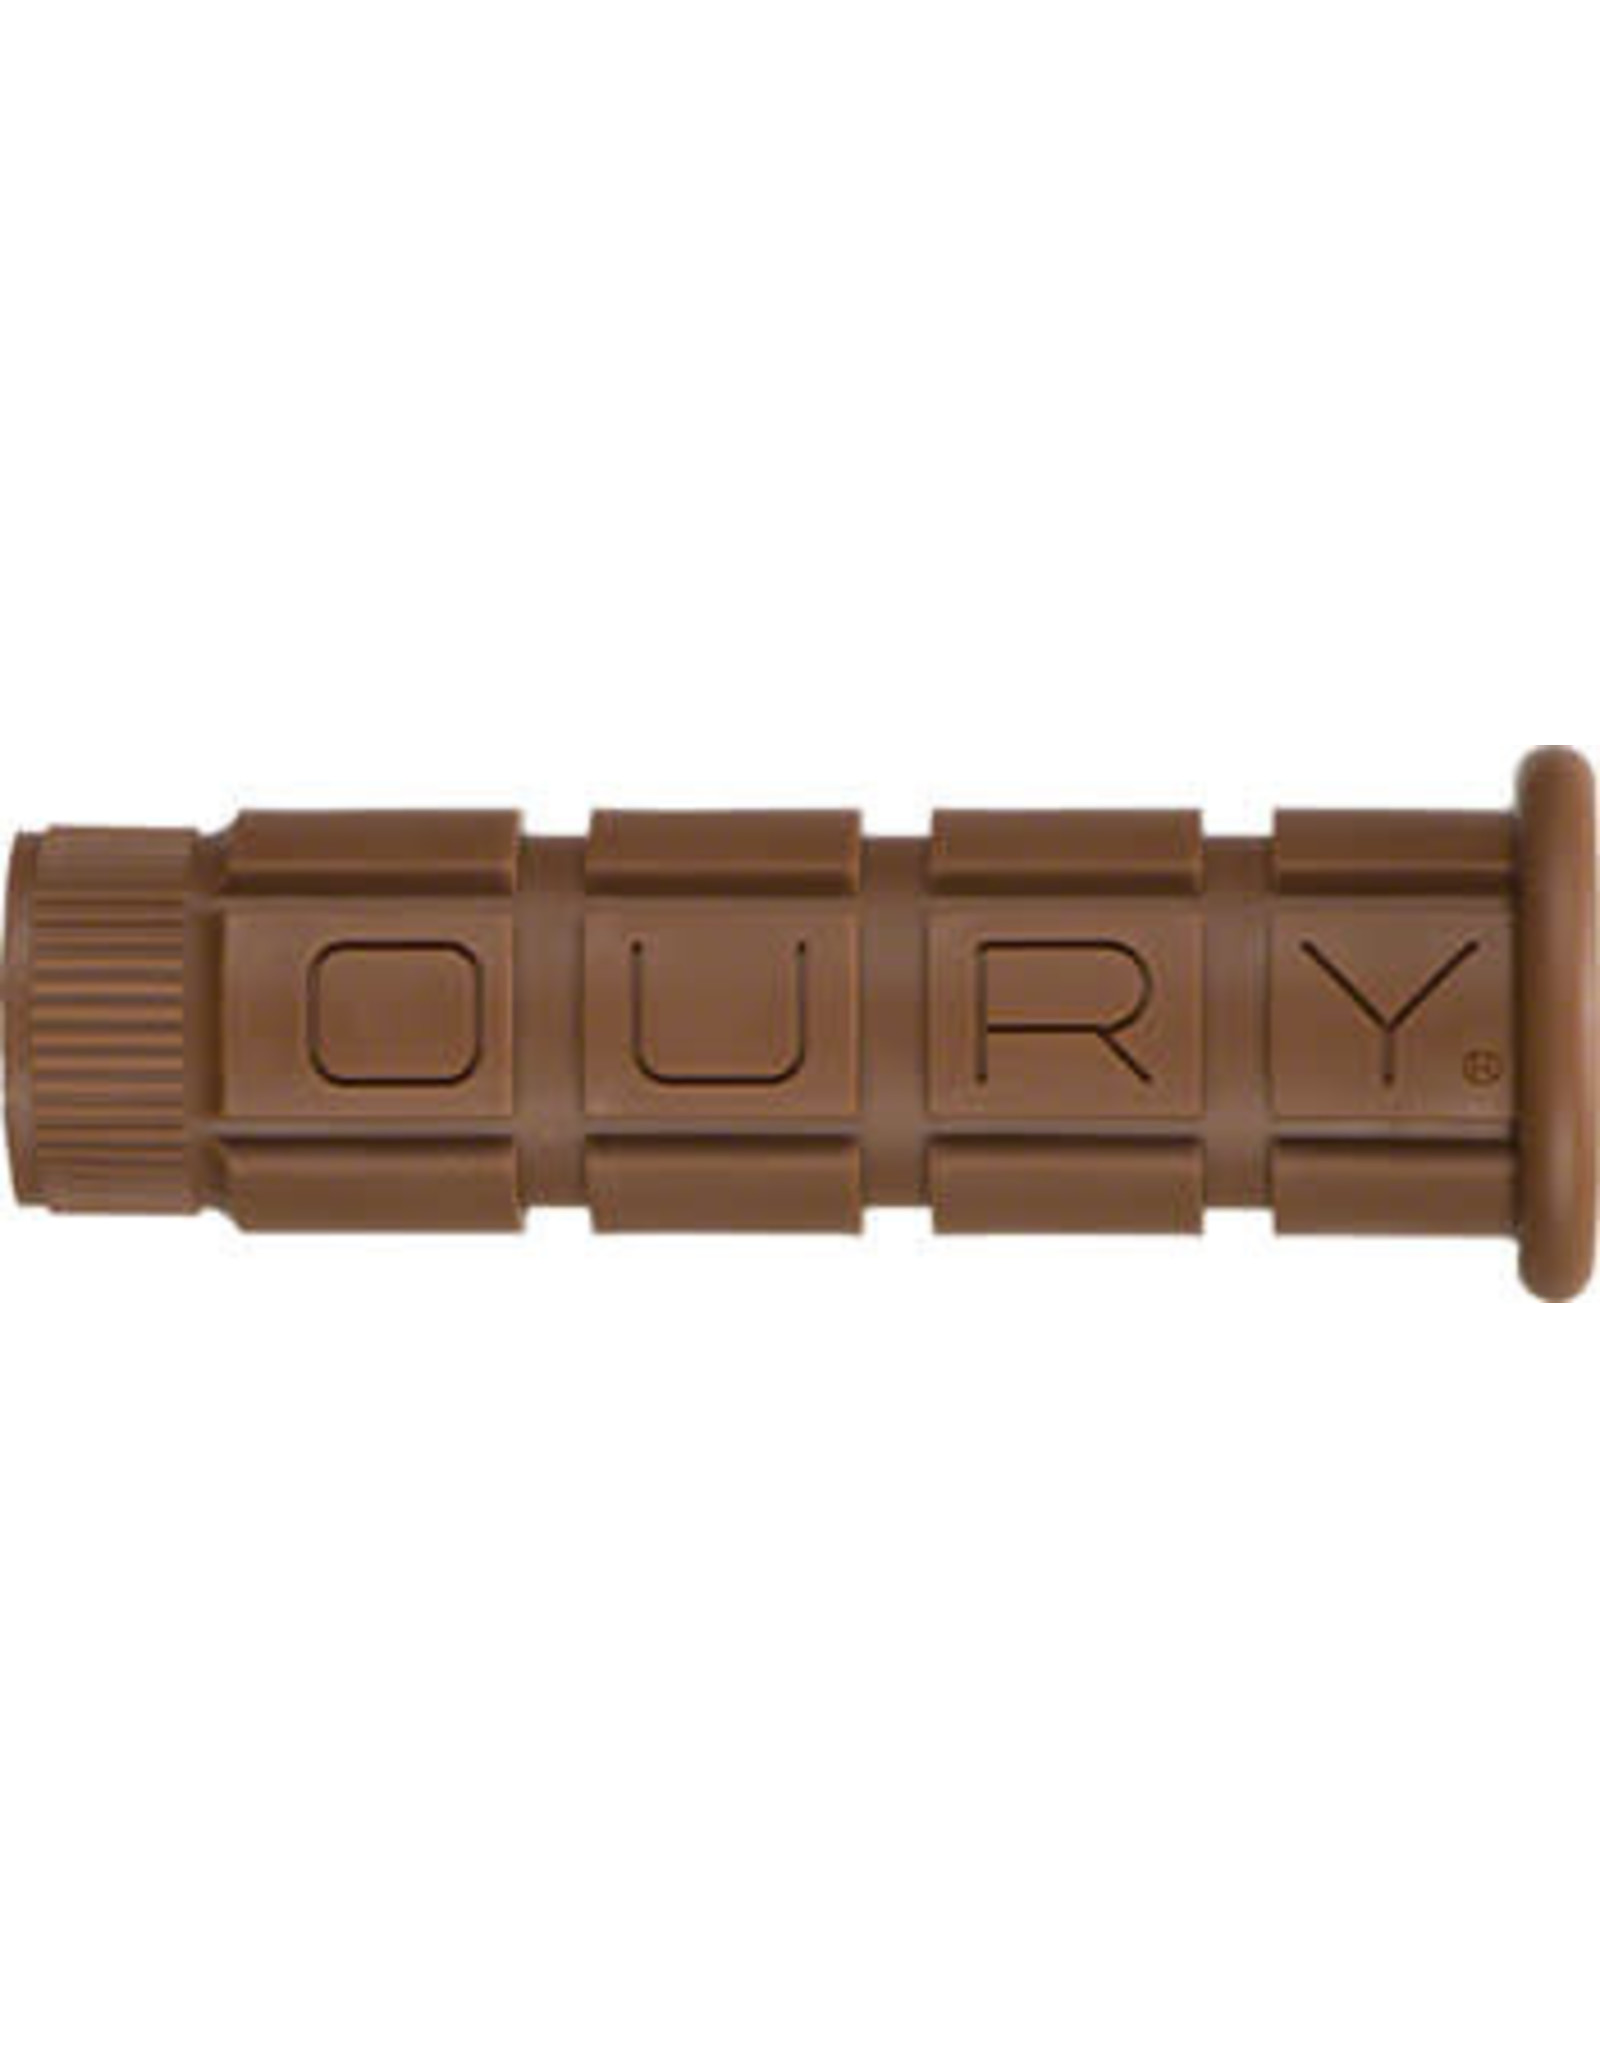 Oury Oury Single Compound Grips